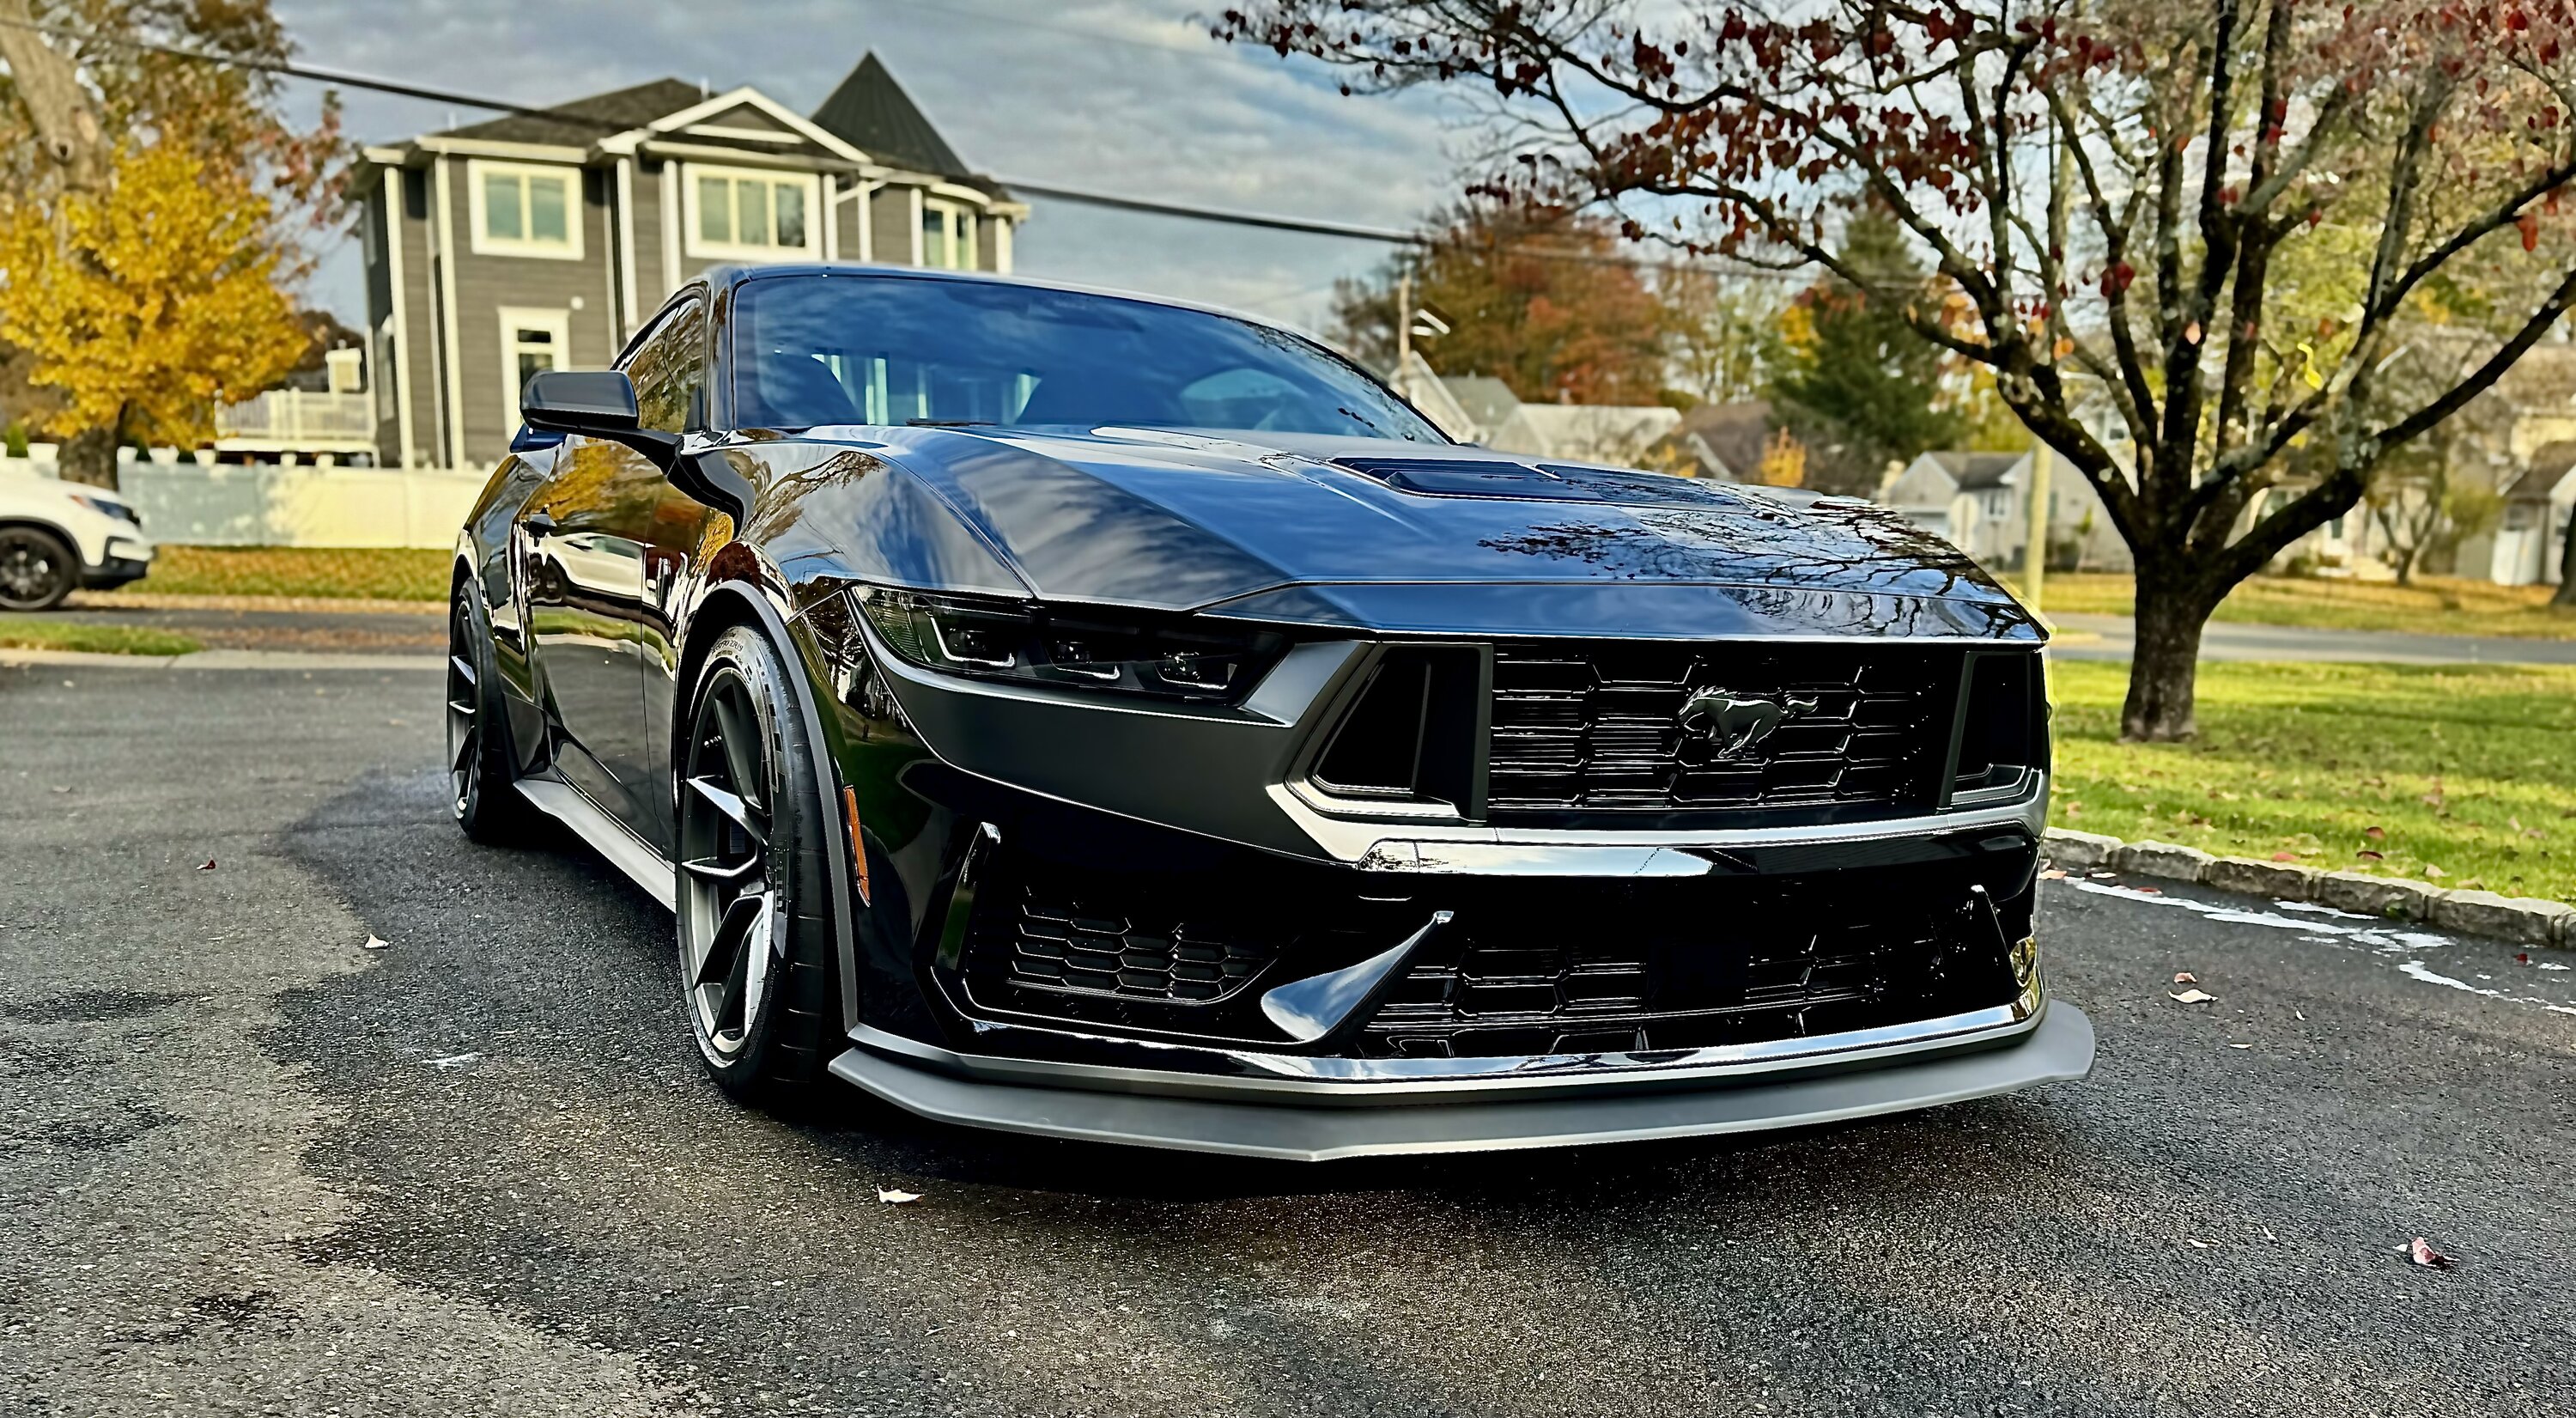 S650 Mustang Dark Horse - Delivered IMG_3028